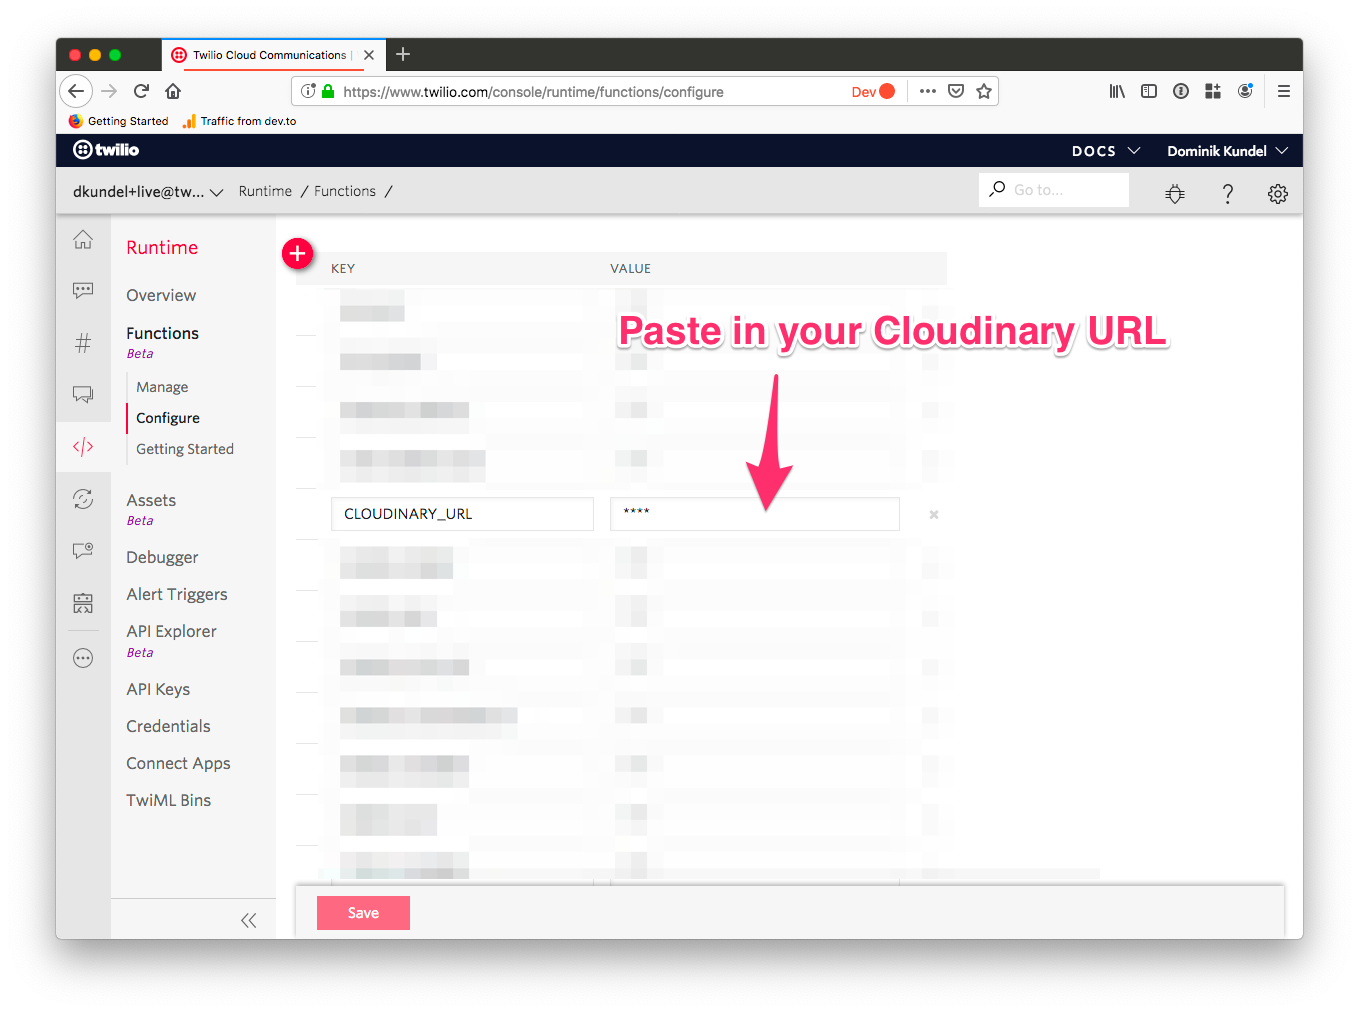 Screenshot of the environment variables in Twilio Functions to indicate pasting your Cloudinary URL